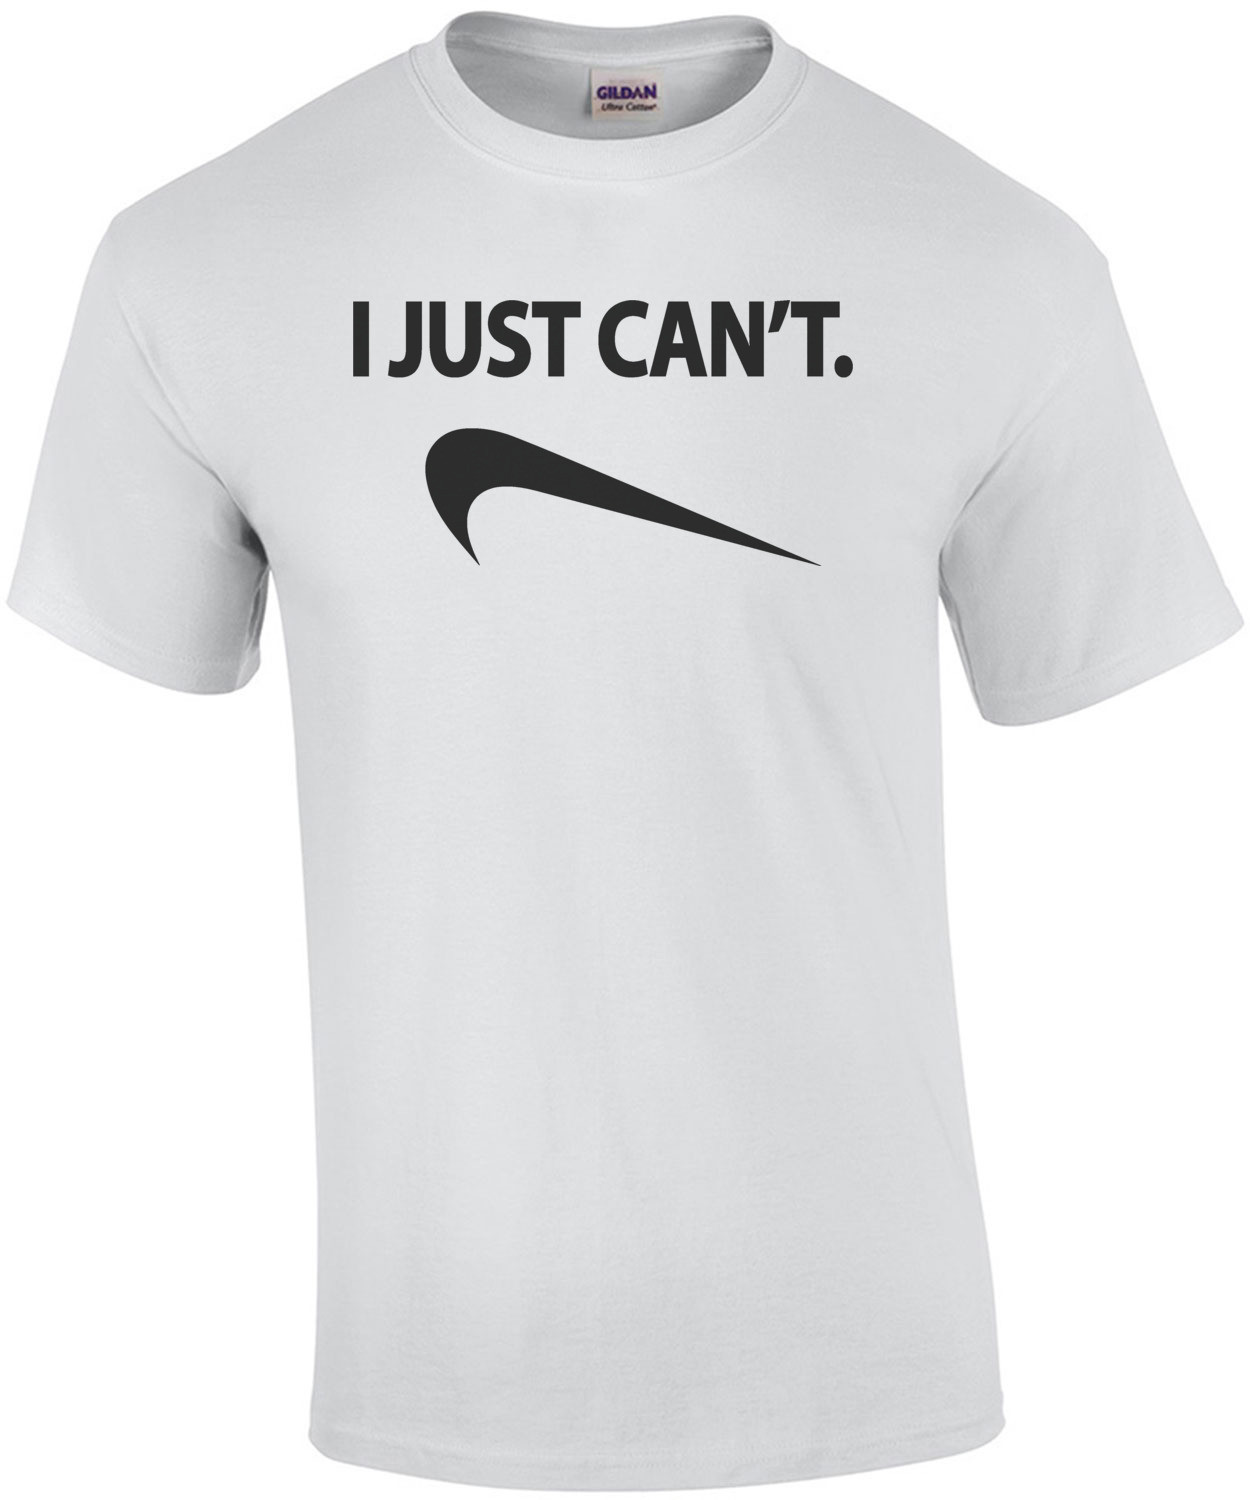 I Just Can't. Nike Parody T-Shirt